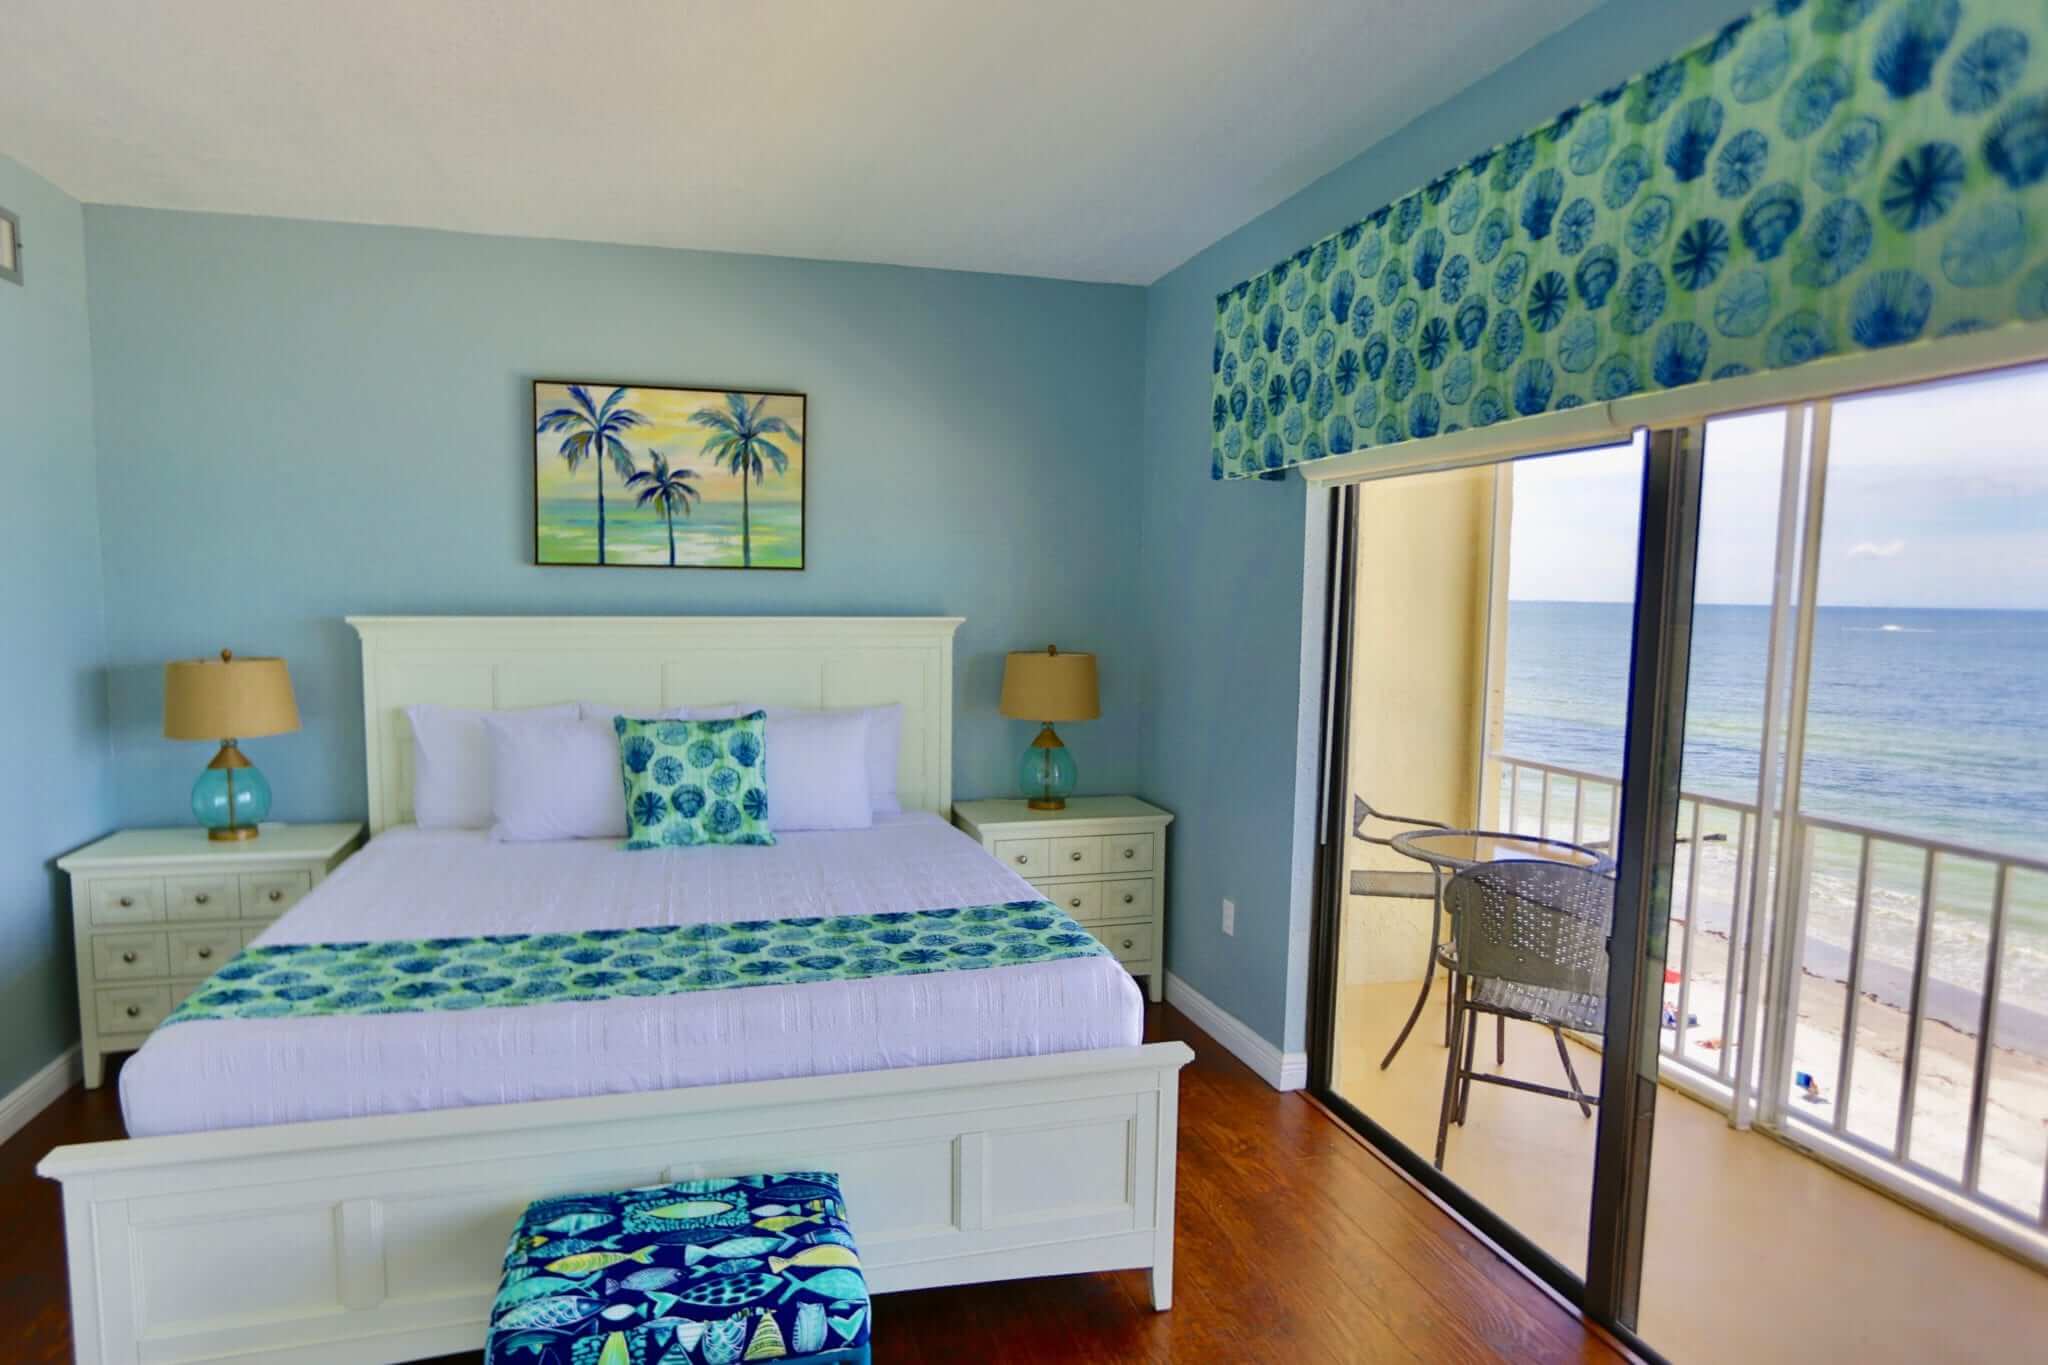 Enjoy a Dreamy Valentines Day at Our Madeira Beach Resort